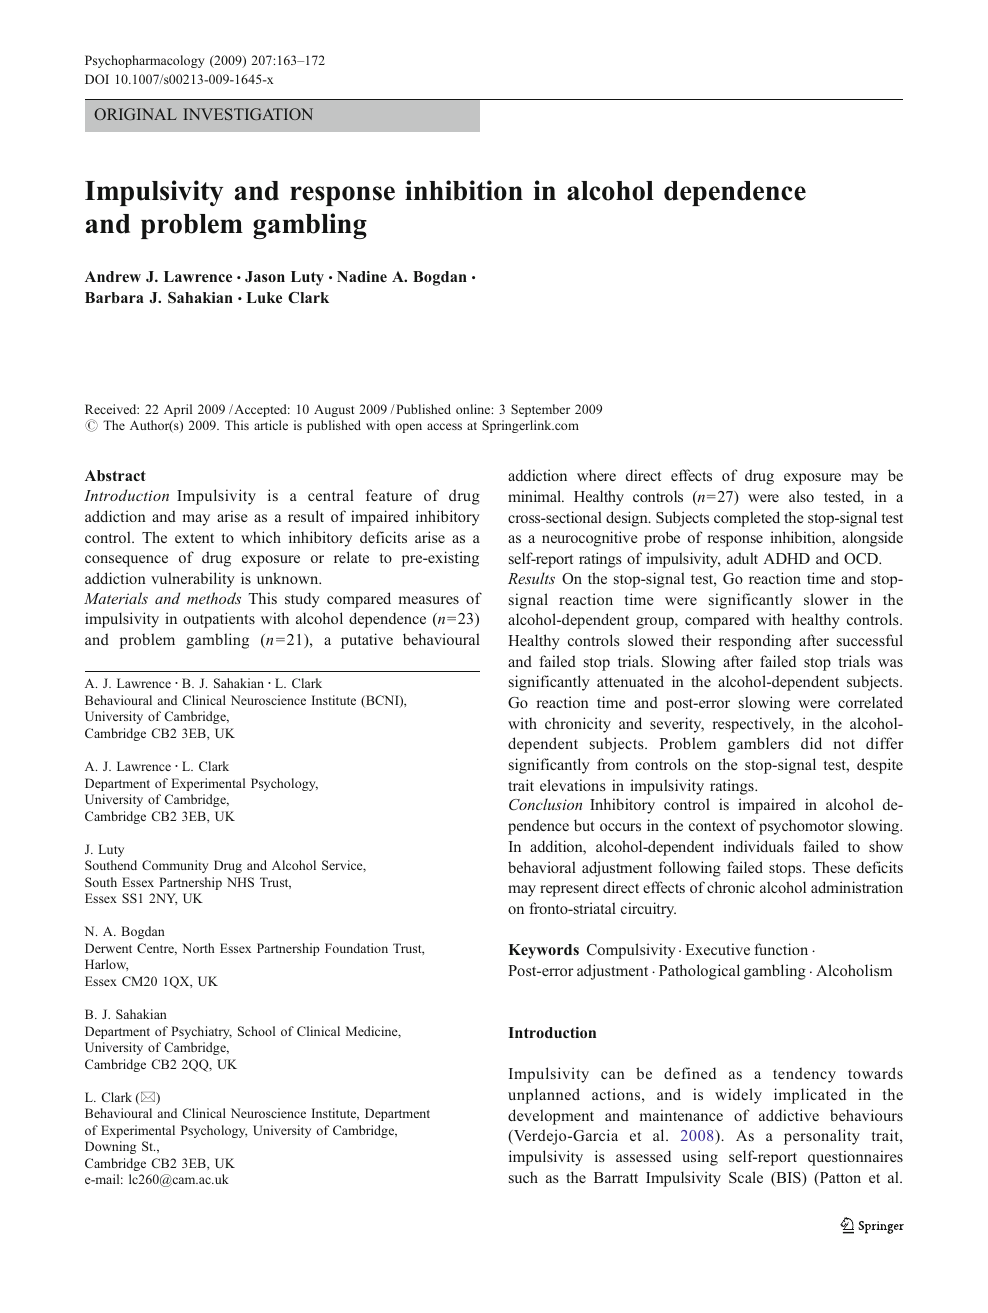 Impulsivity And Response Inhibition In Alcohol Dependence And Problem Gambling Topic Of Research Paper In Clinical Medicine Download Scholarly Article Pdf And Read For Free On Cyberleninka Open Science Hub